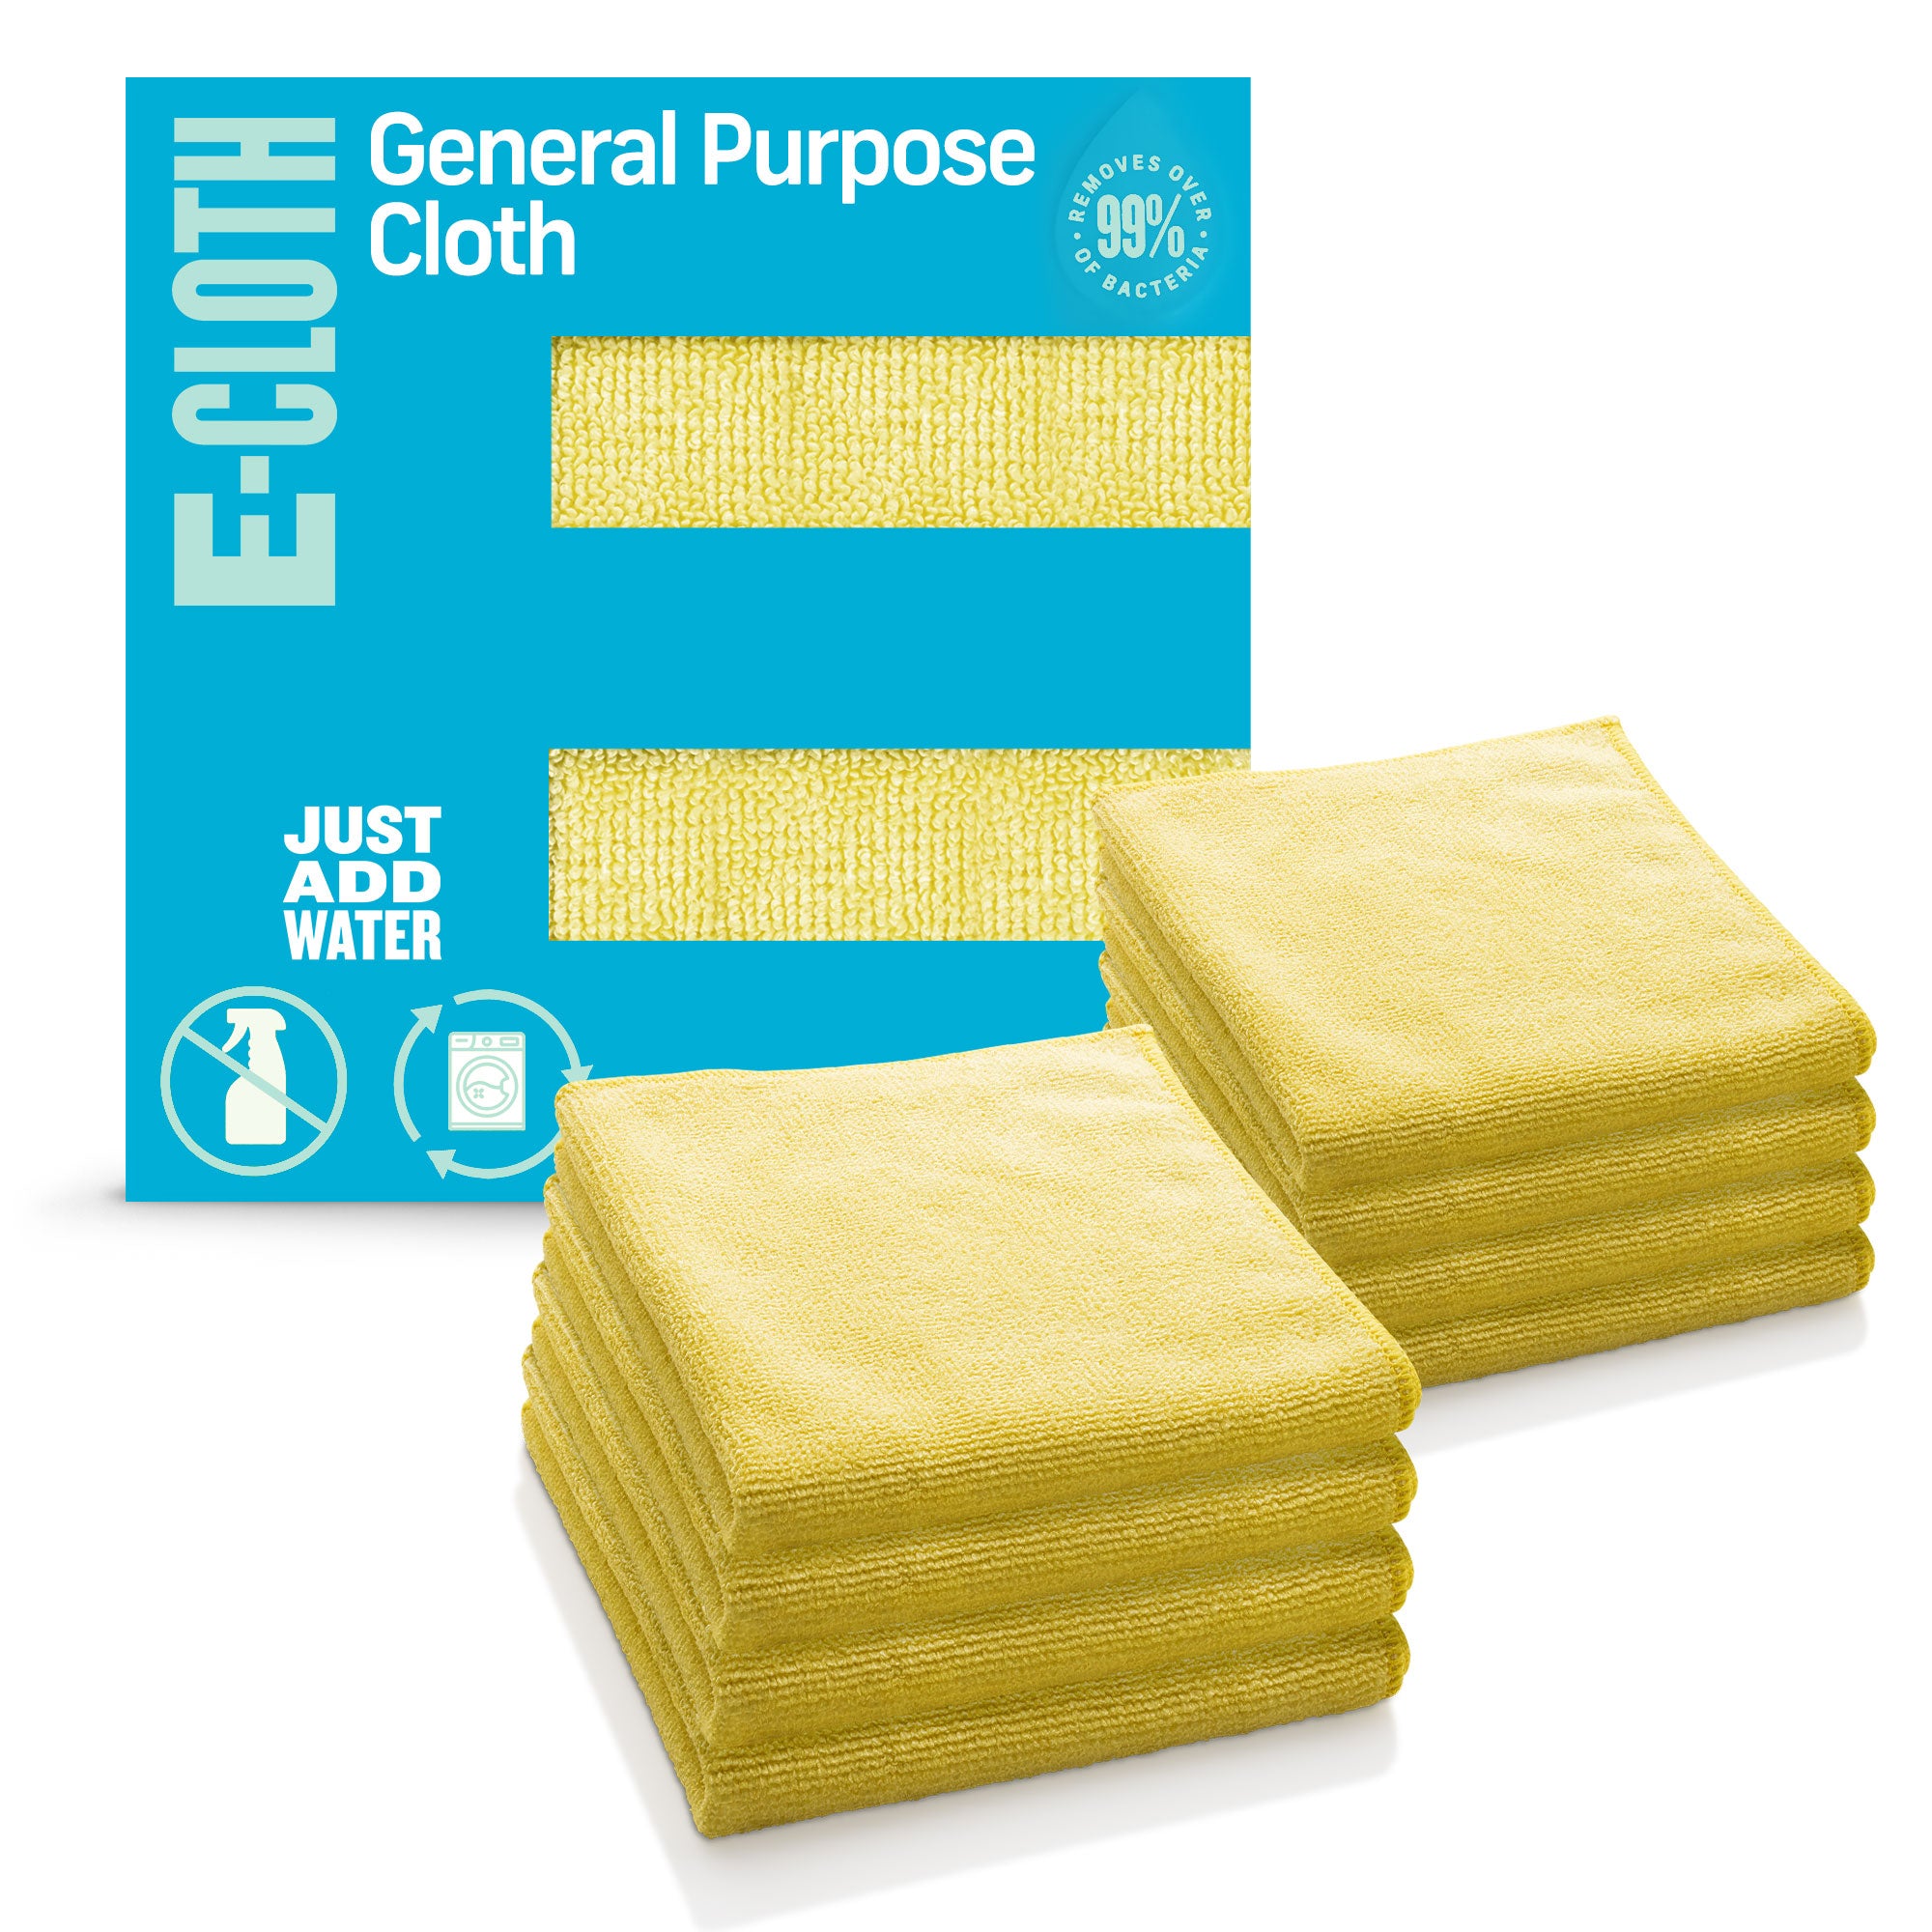 E-Cloth General Purpose Cleaning Cloth, Premium Microfiber Cleaning Cloth,  Ideal for Kitchen, Countertops, Sinks, and Bathrooms 100 Wash Guarantee,  Alaskan Blue, 4 Pack 